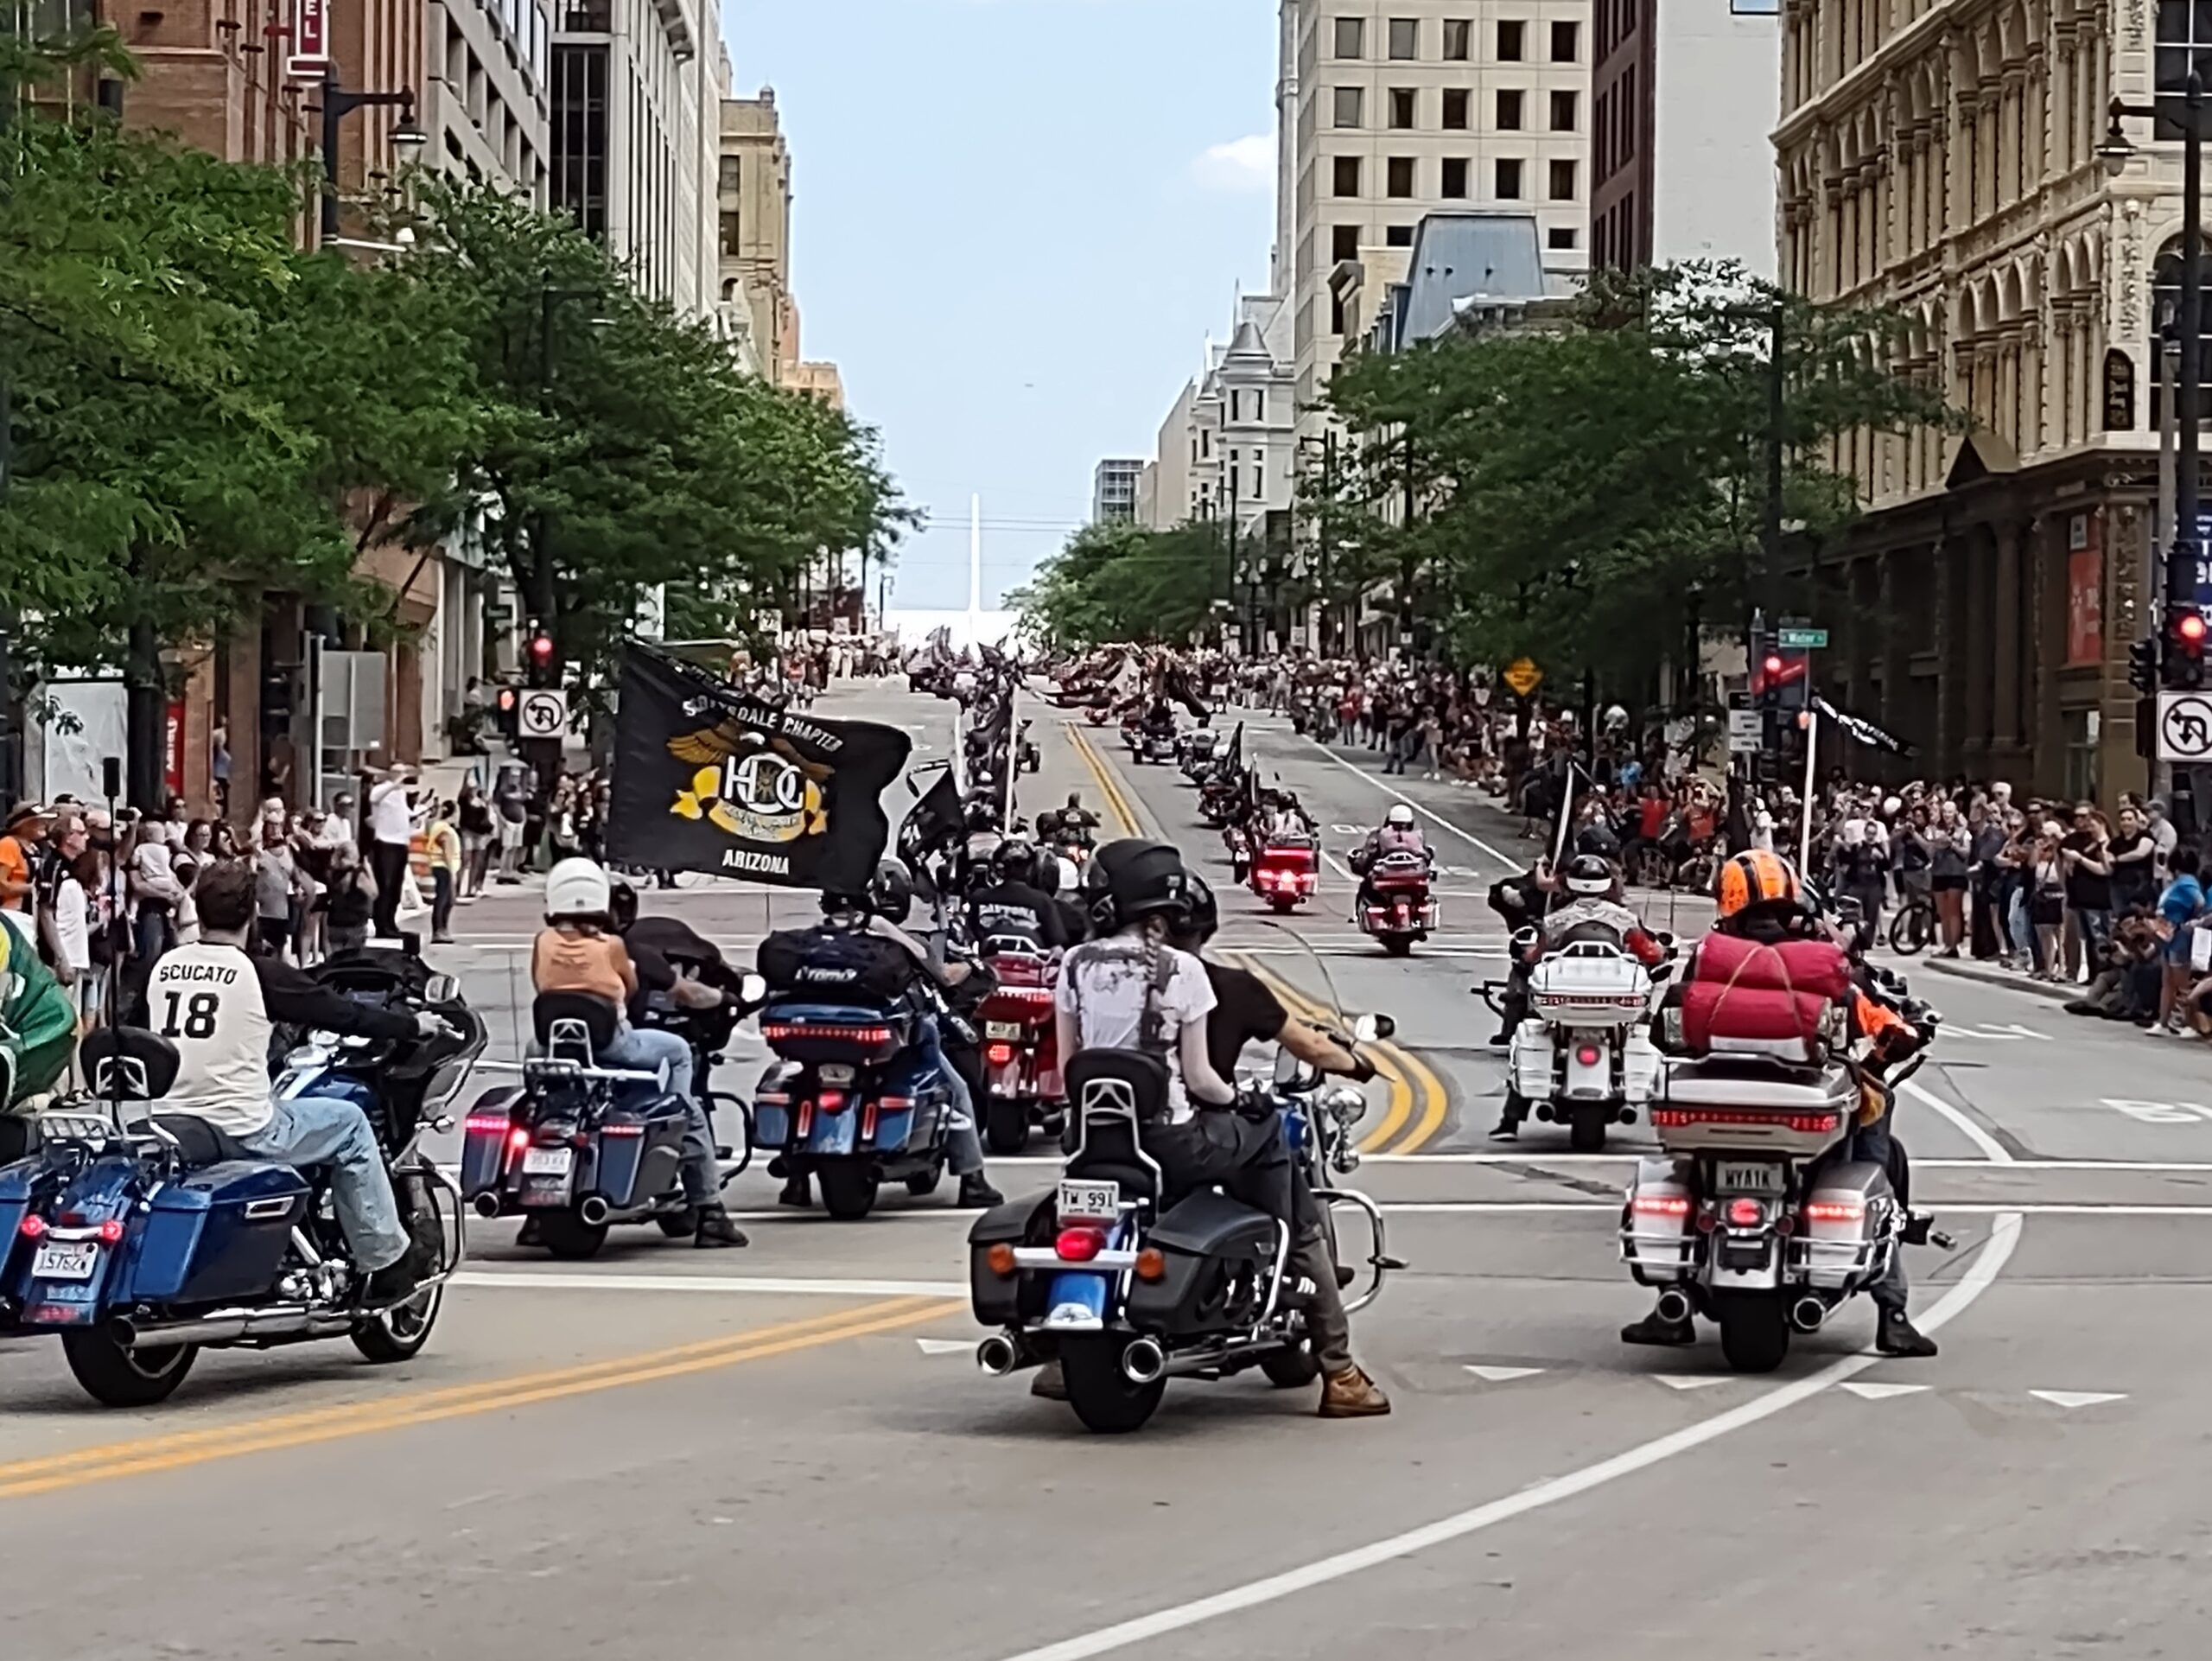 HarleyDavidson concludes with downtown parade